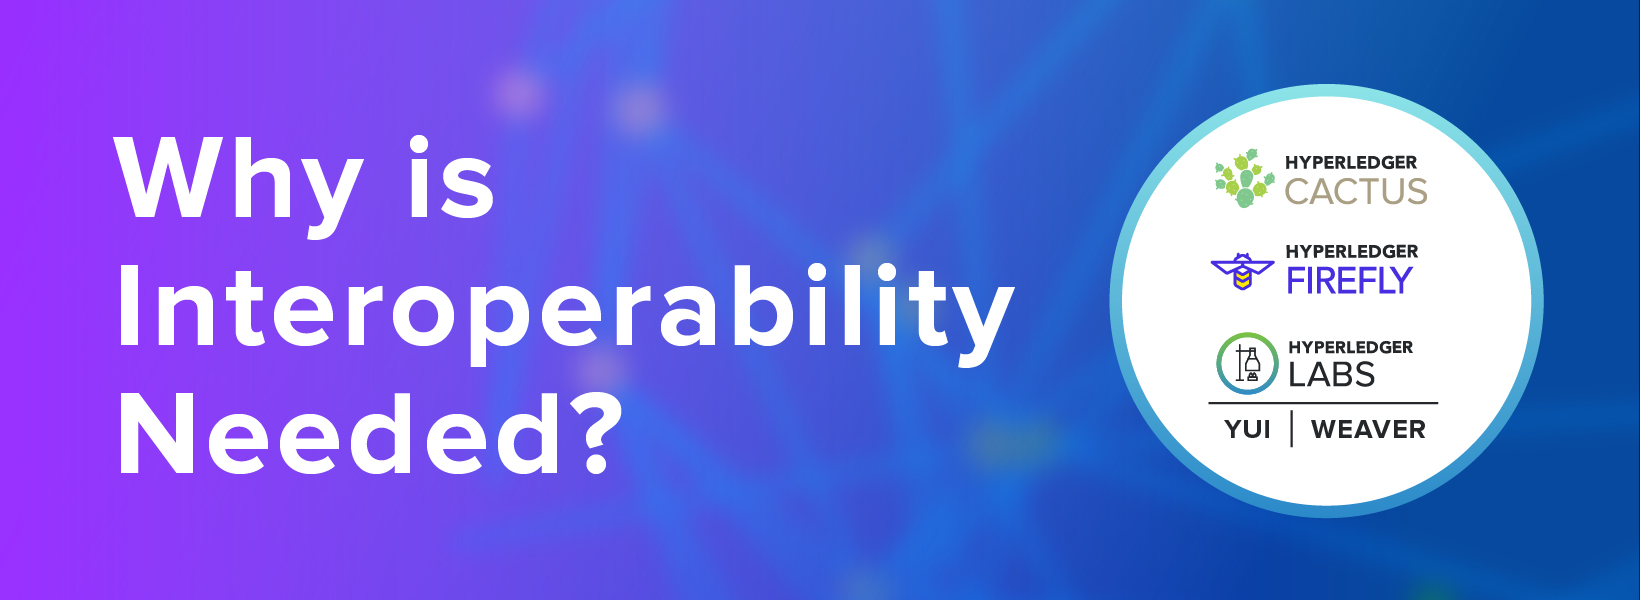 Why is Interoperability Needed?